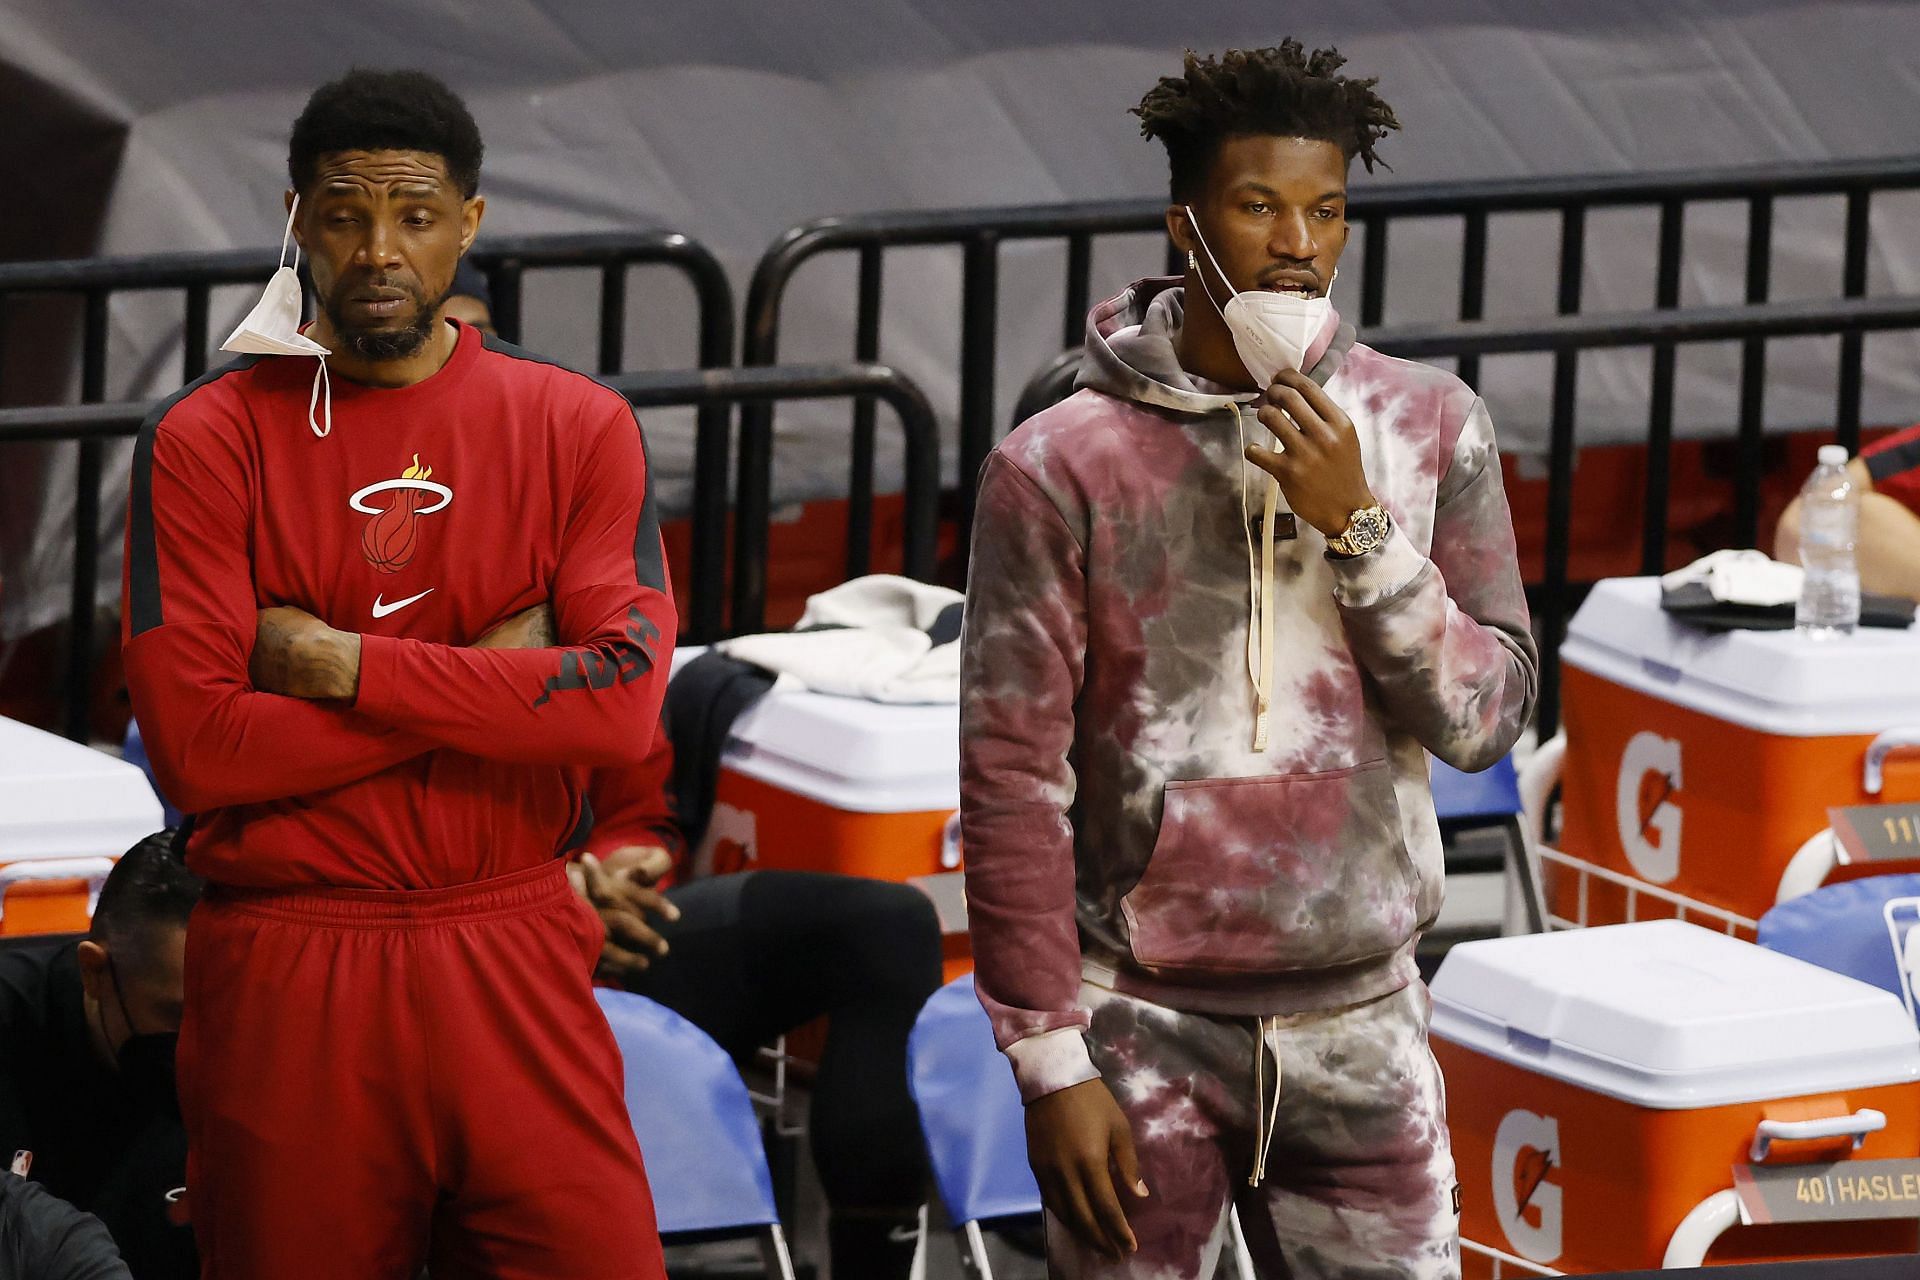 The Miami Heat&#039;s Udonis Haslem and Jimmy Butler got into a heated exchanged during the game versus the Golden State Warriors